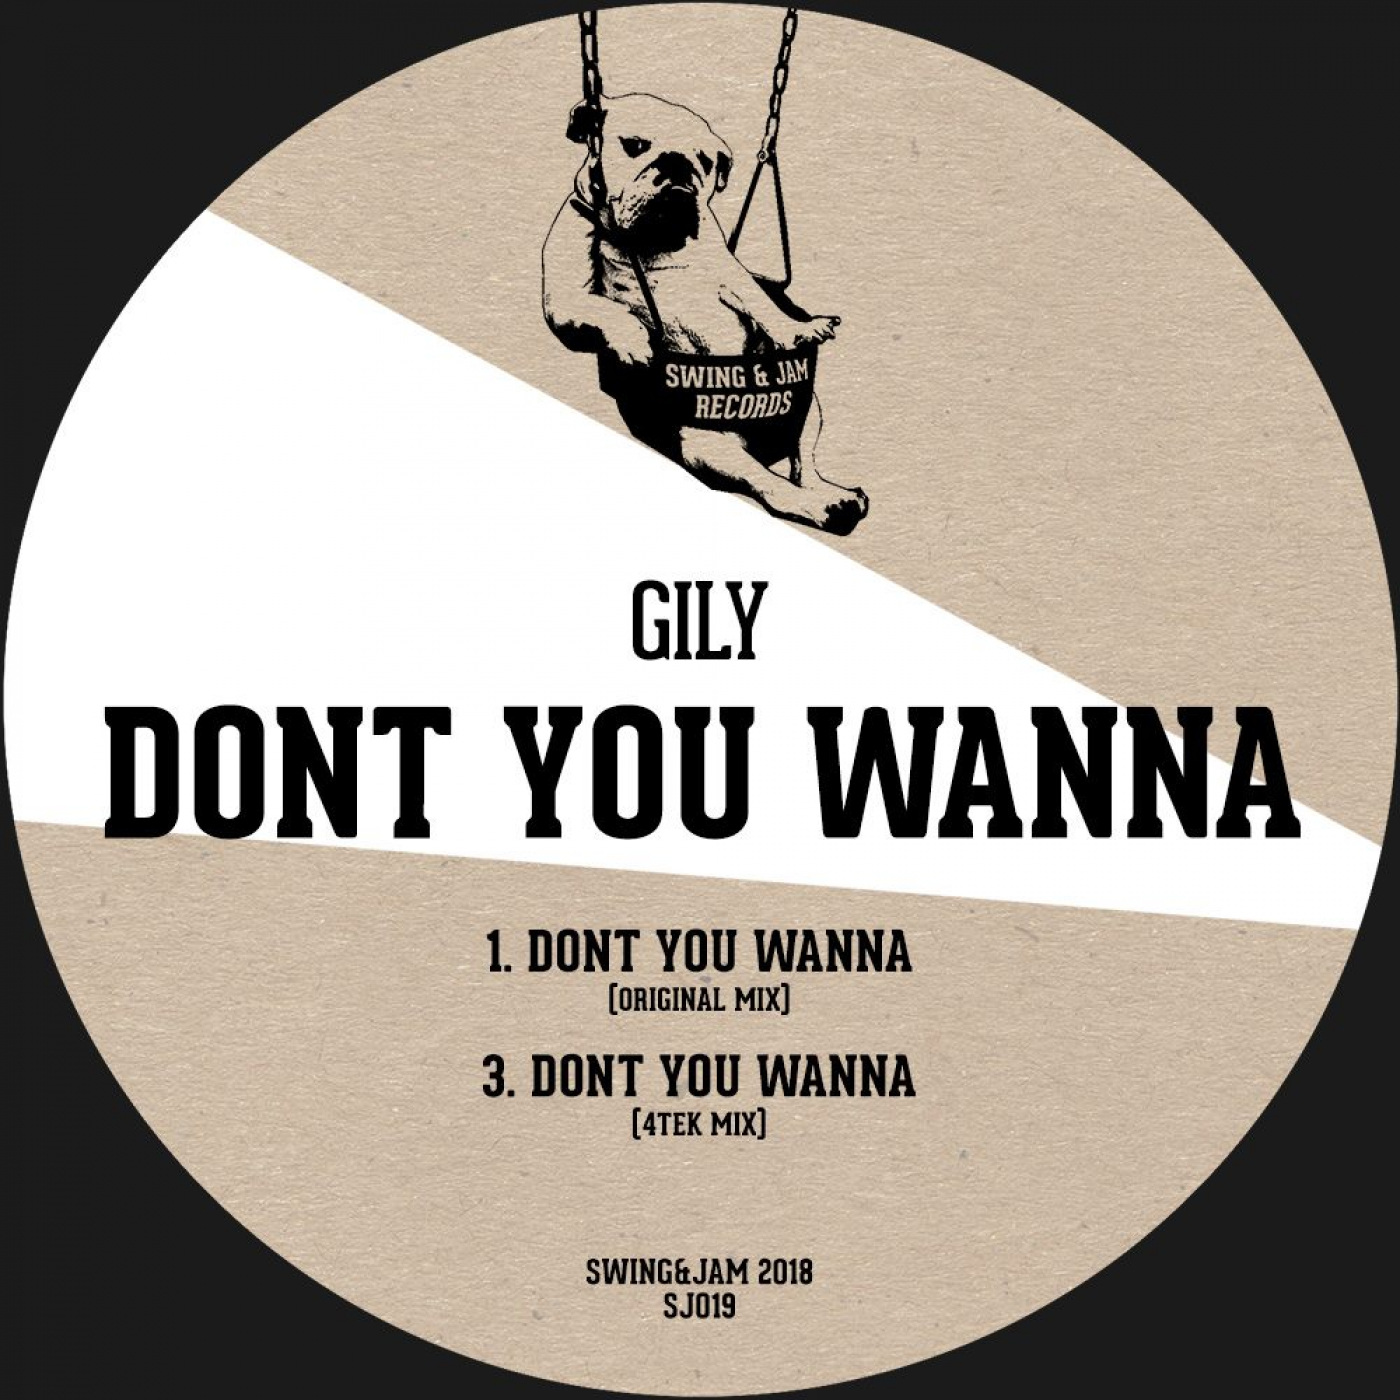 Gily - Don't You Wanna / Swing & Jam Records